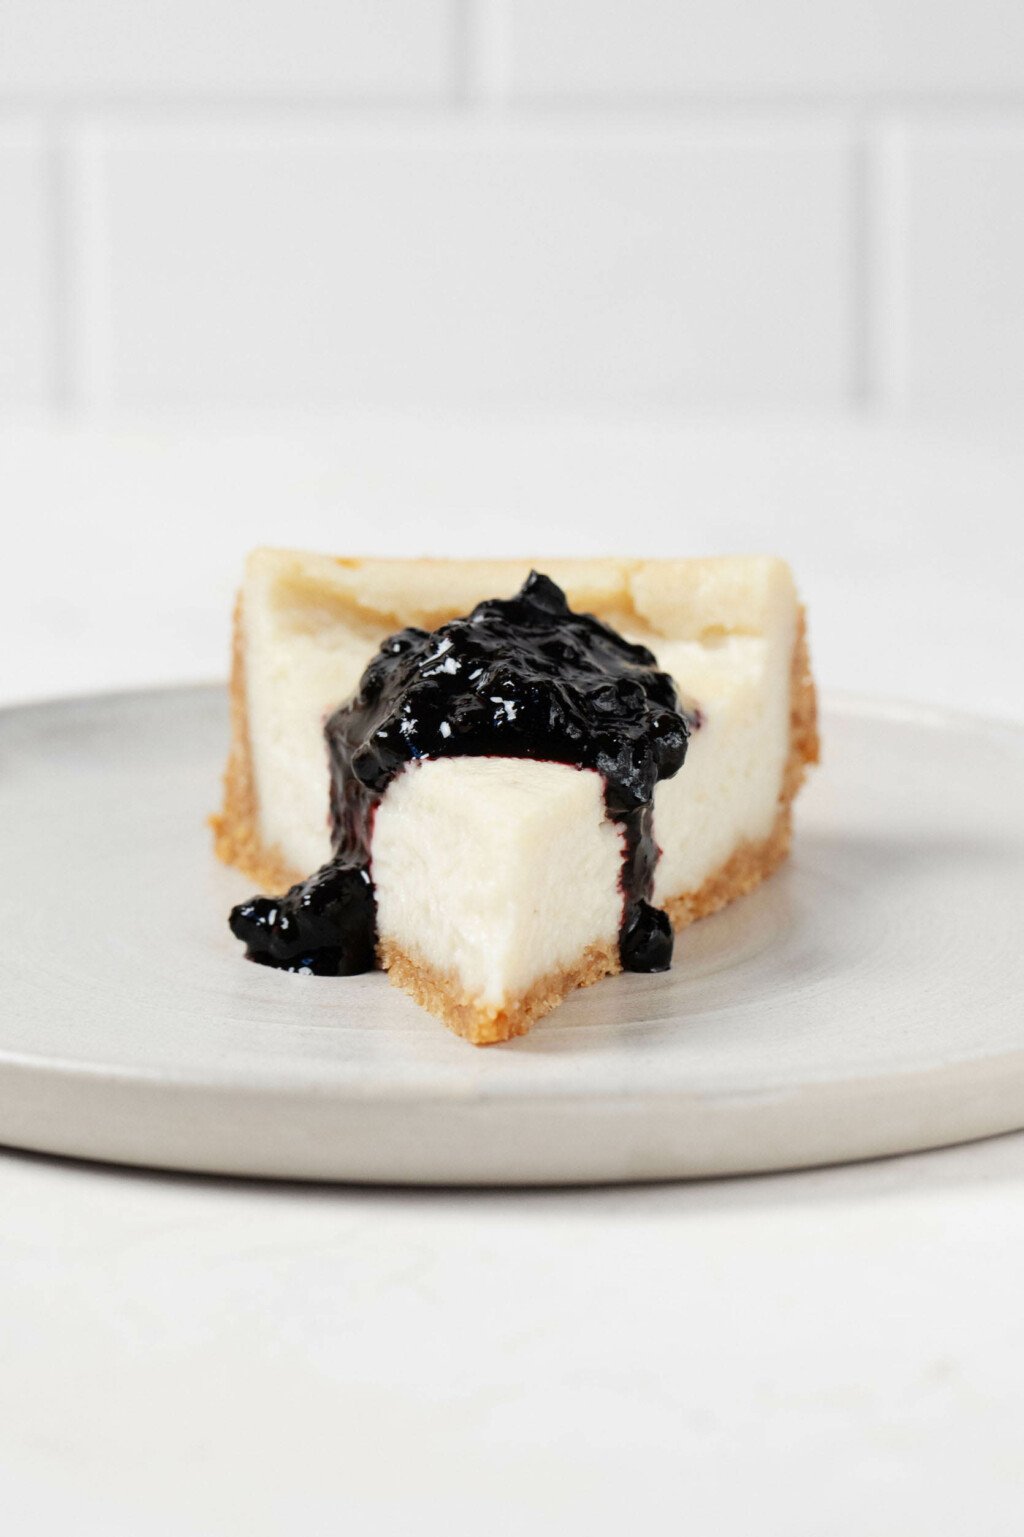 A slice of ultra creamy vegan cheesecake has been cut and topped with a dollop of blueberry sauce. It rests on a round, ceramic plate.